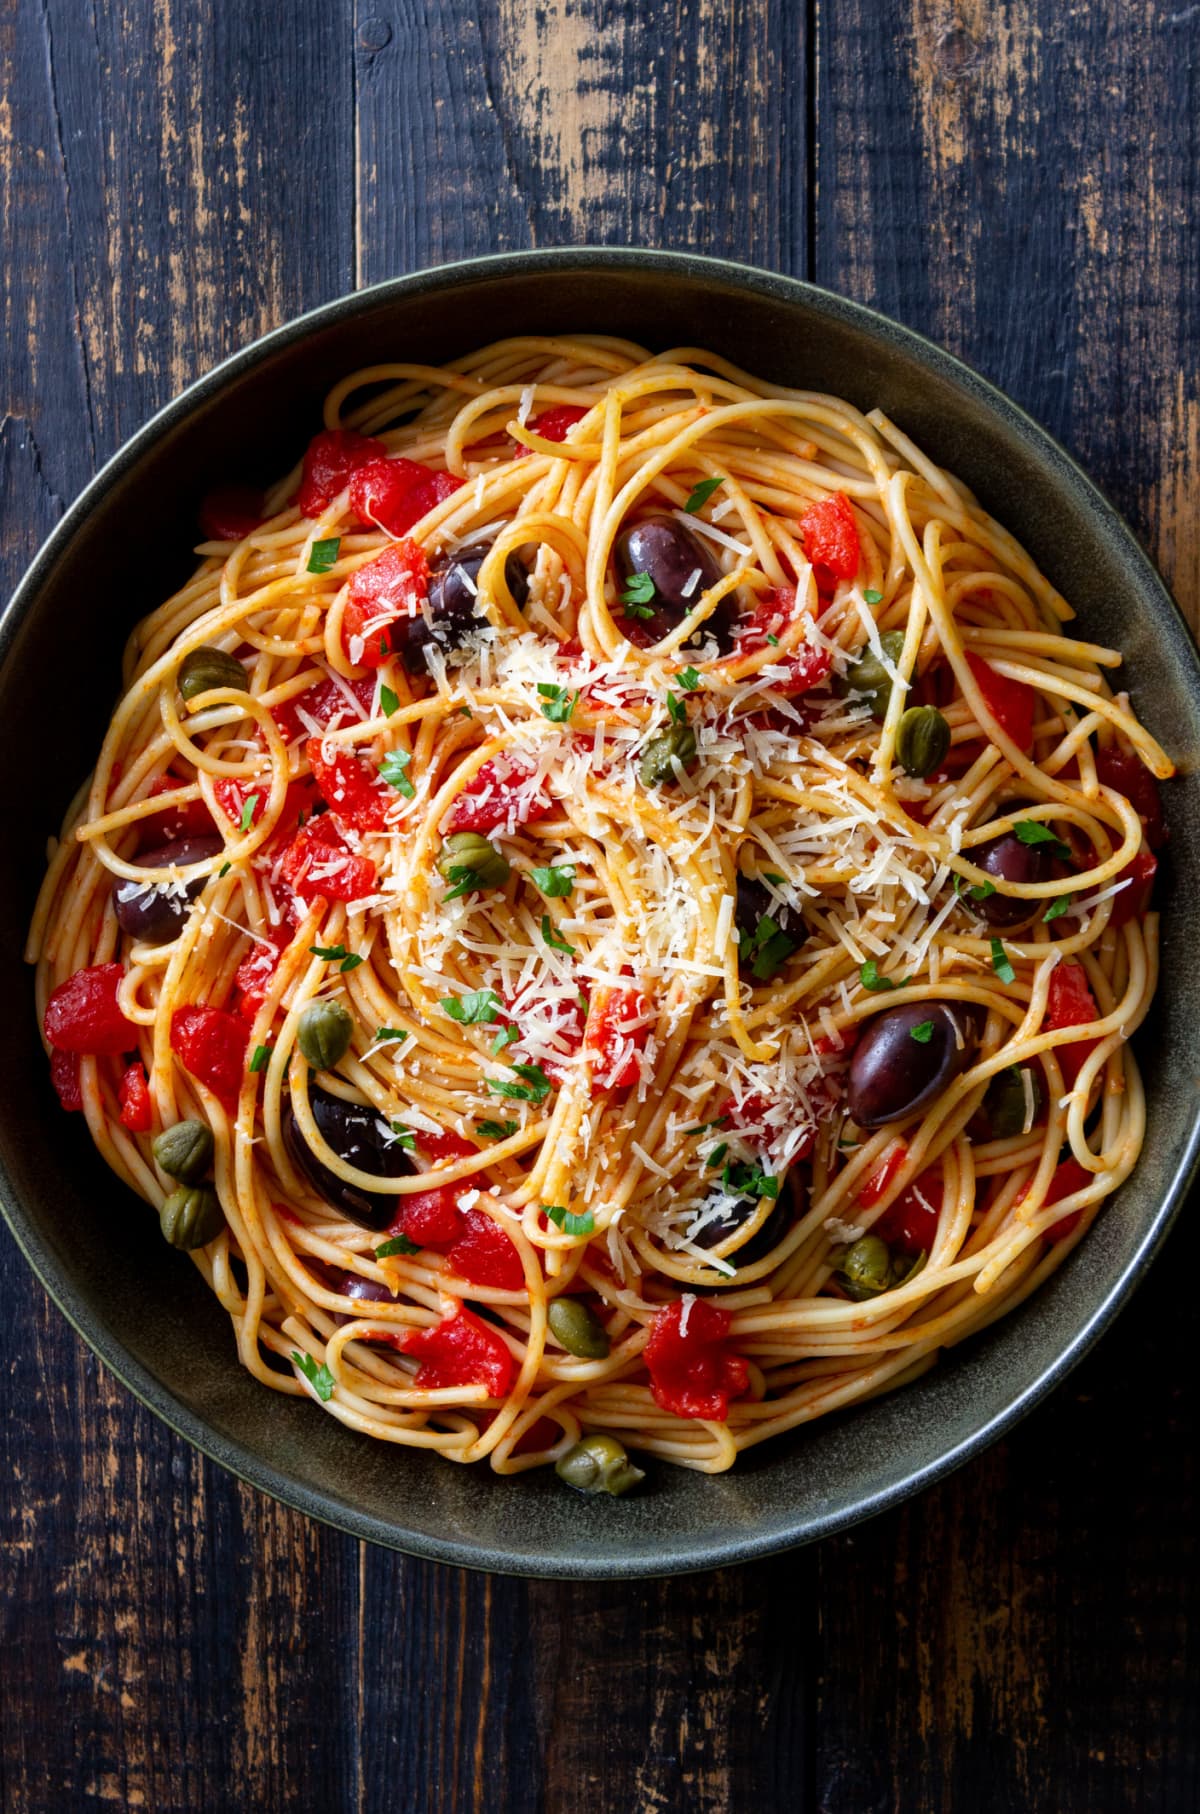 Spaghetti pasta Alla Puttanesca with capers, Kalamata olives, cheese, tomatoes and anchovies. Italian food